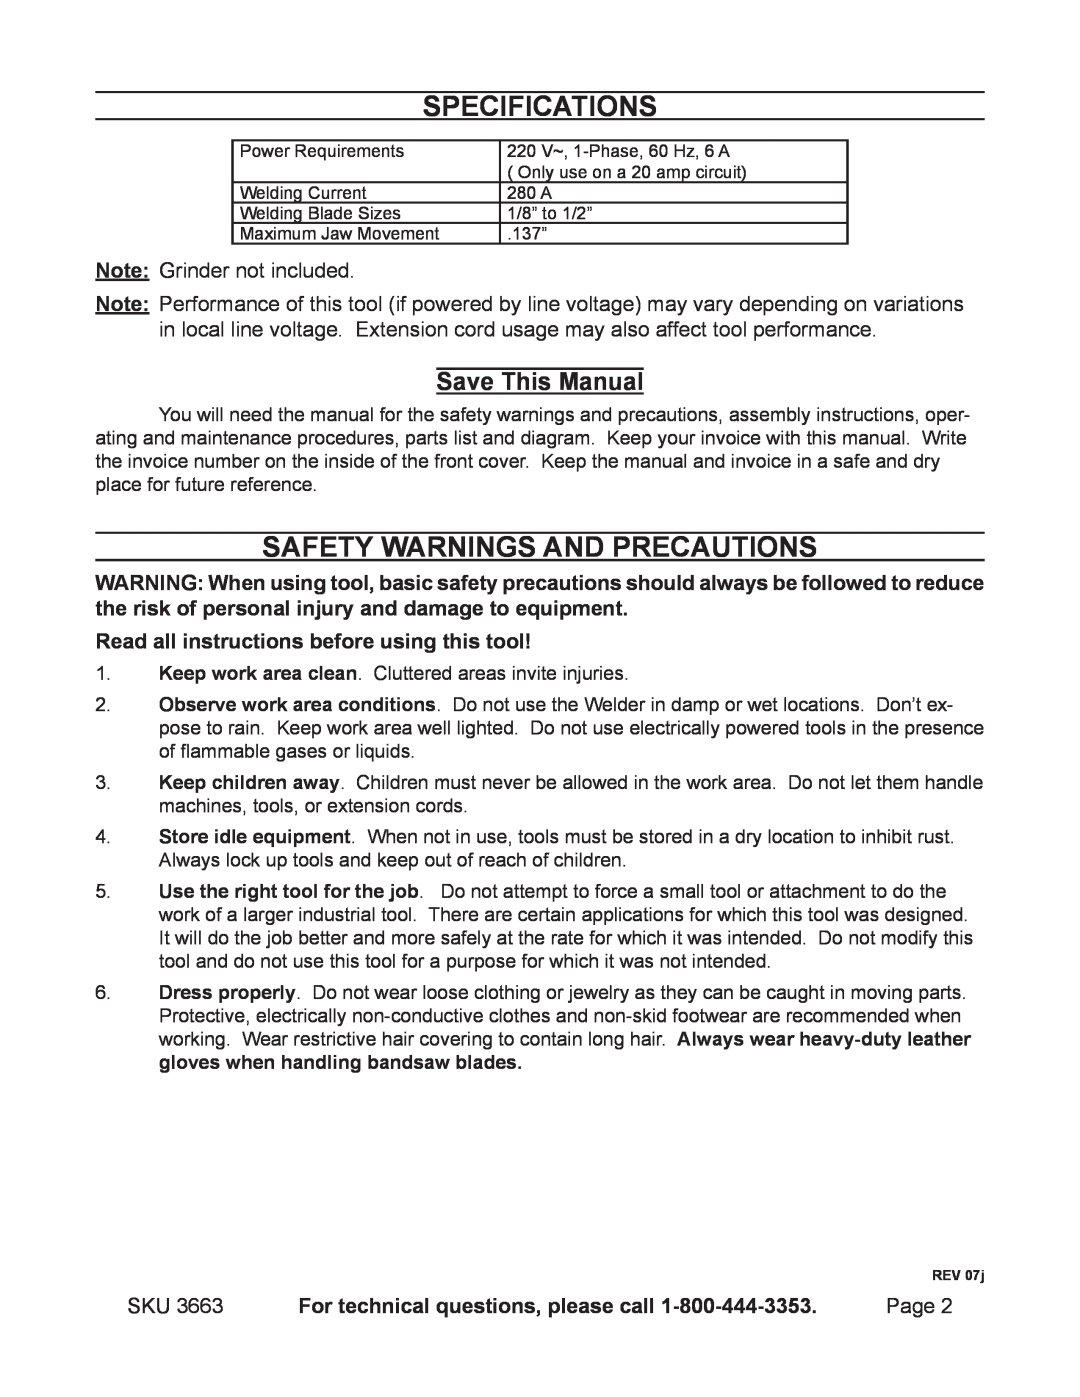 Chicago Electric BANDSAW BLADE WELDER, 3663 Specifications, Safety Warnings and Precautions, Save This Manual, Page 